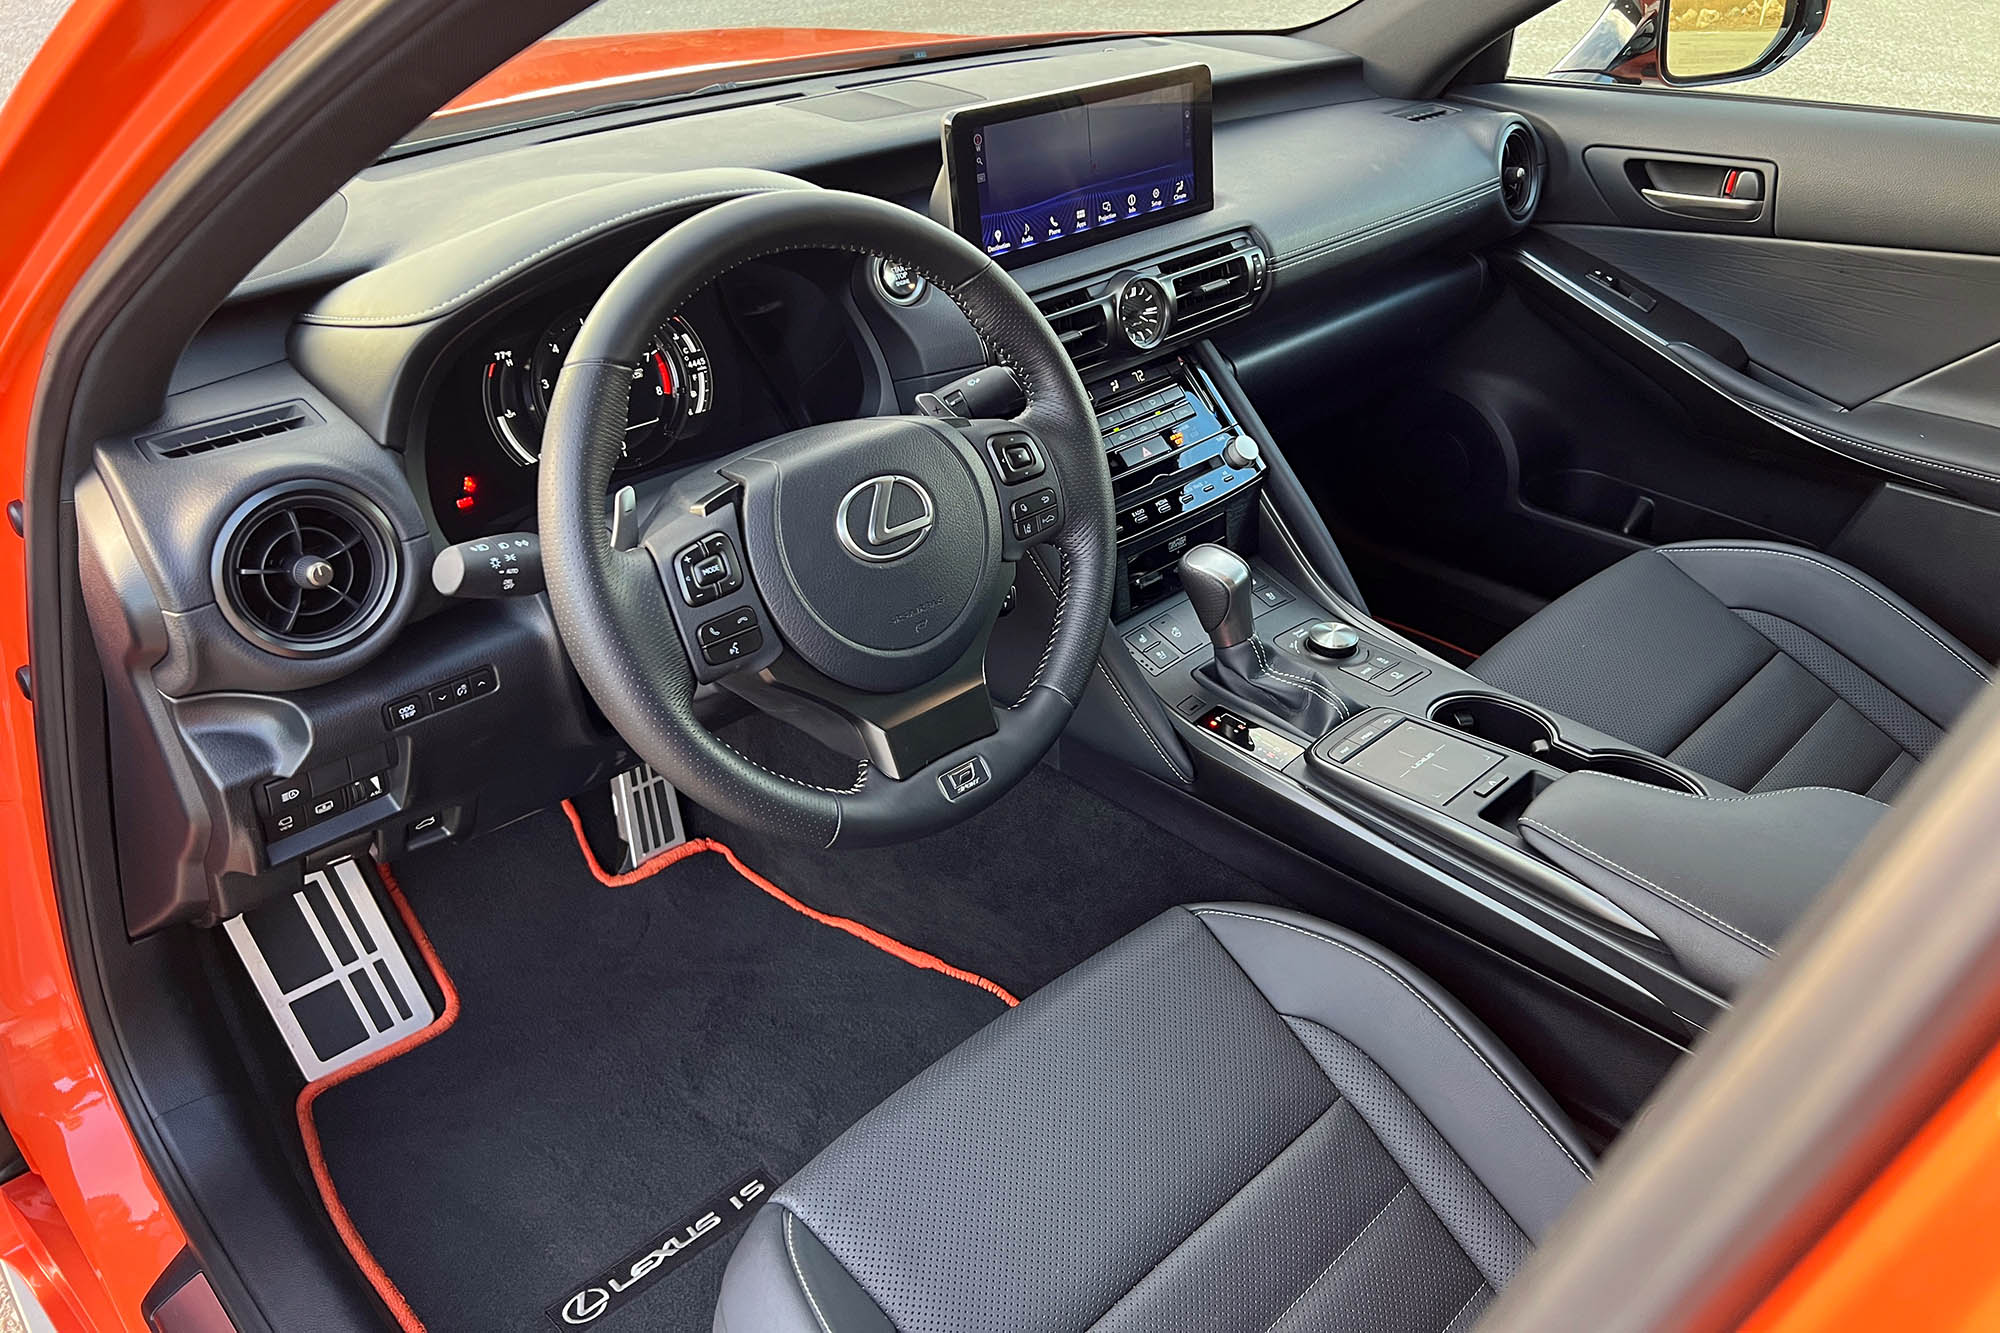 The front seats and dashboard of an orange 2023 Lexus IS 500